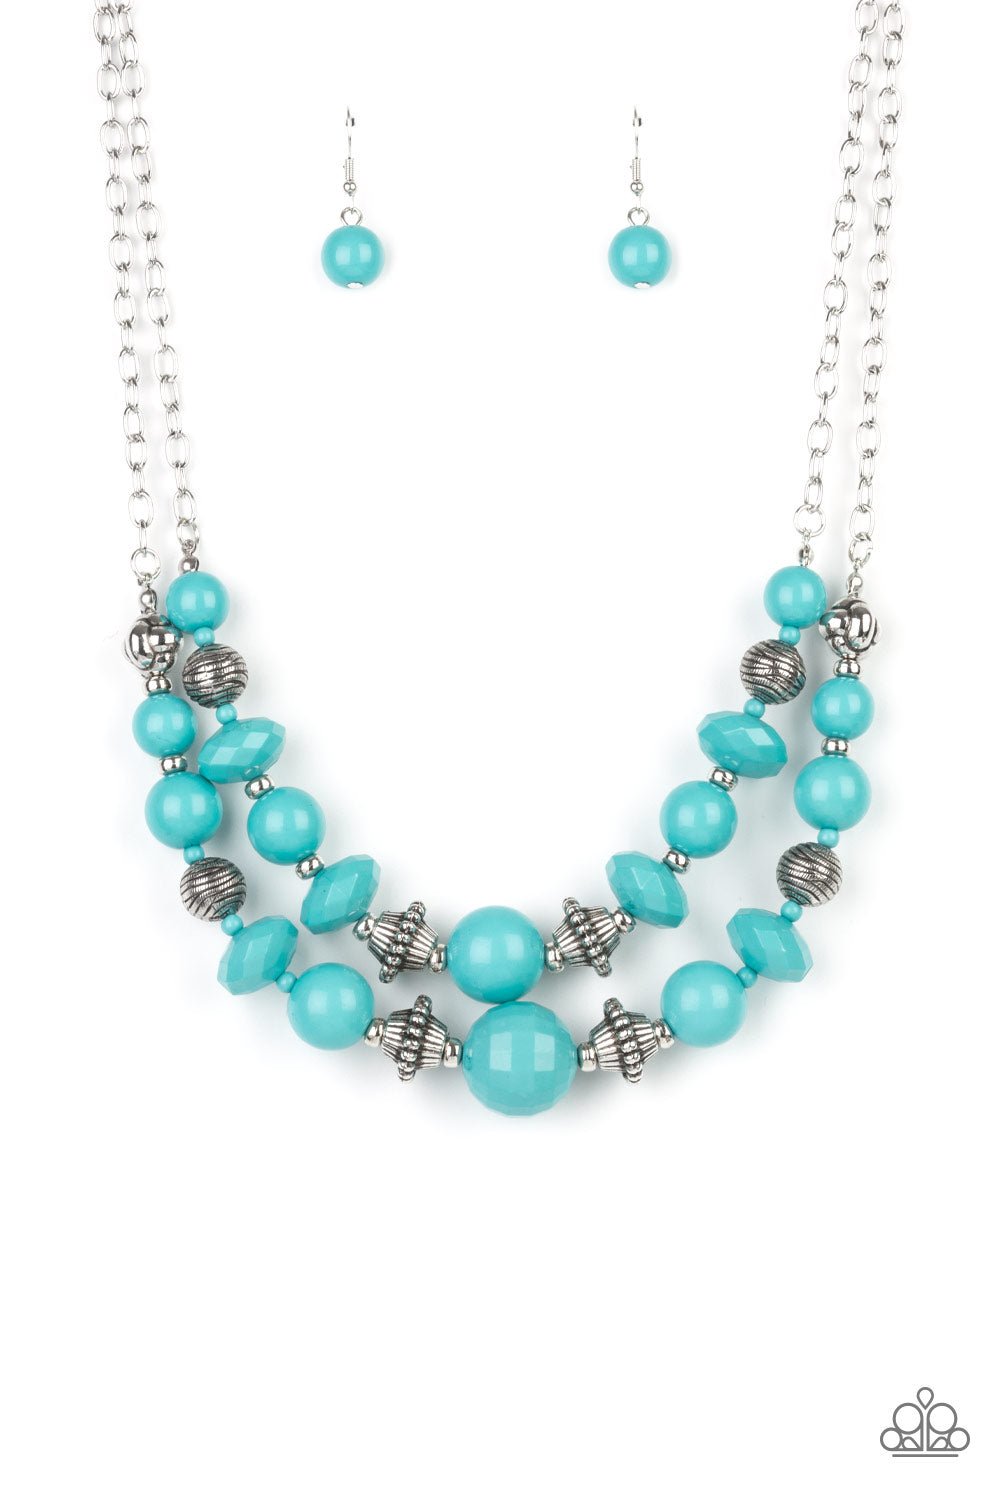 five-dollar-jewelry-upscale-chic-blue-necklace-paparazzi-accessories